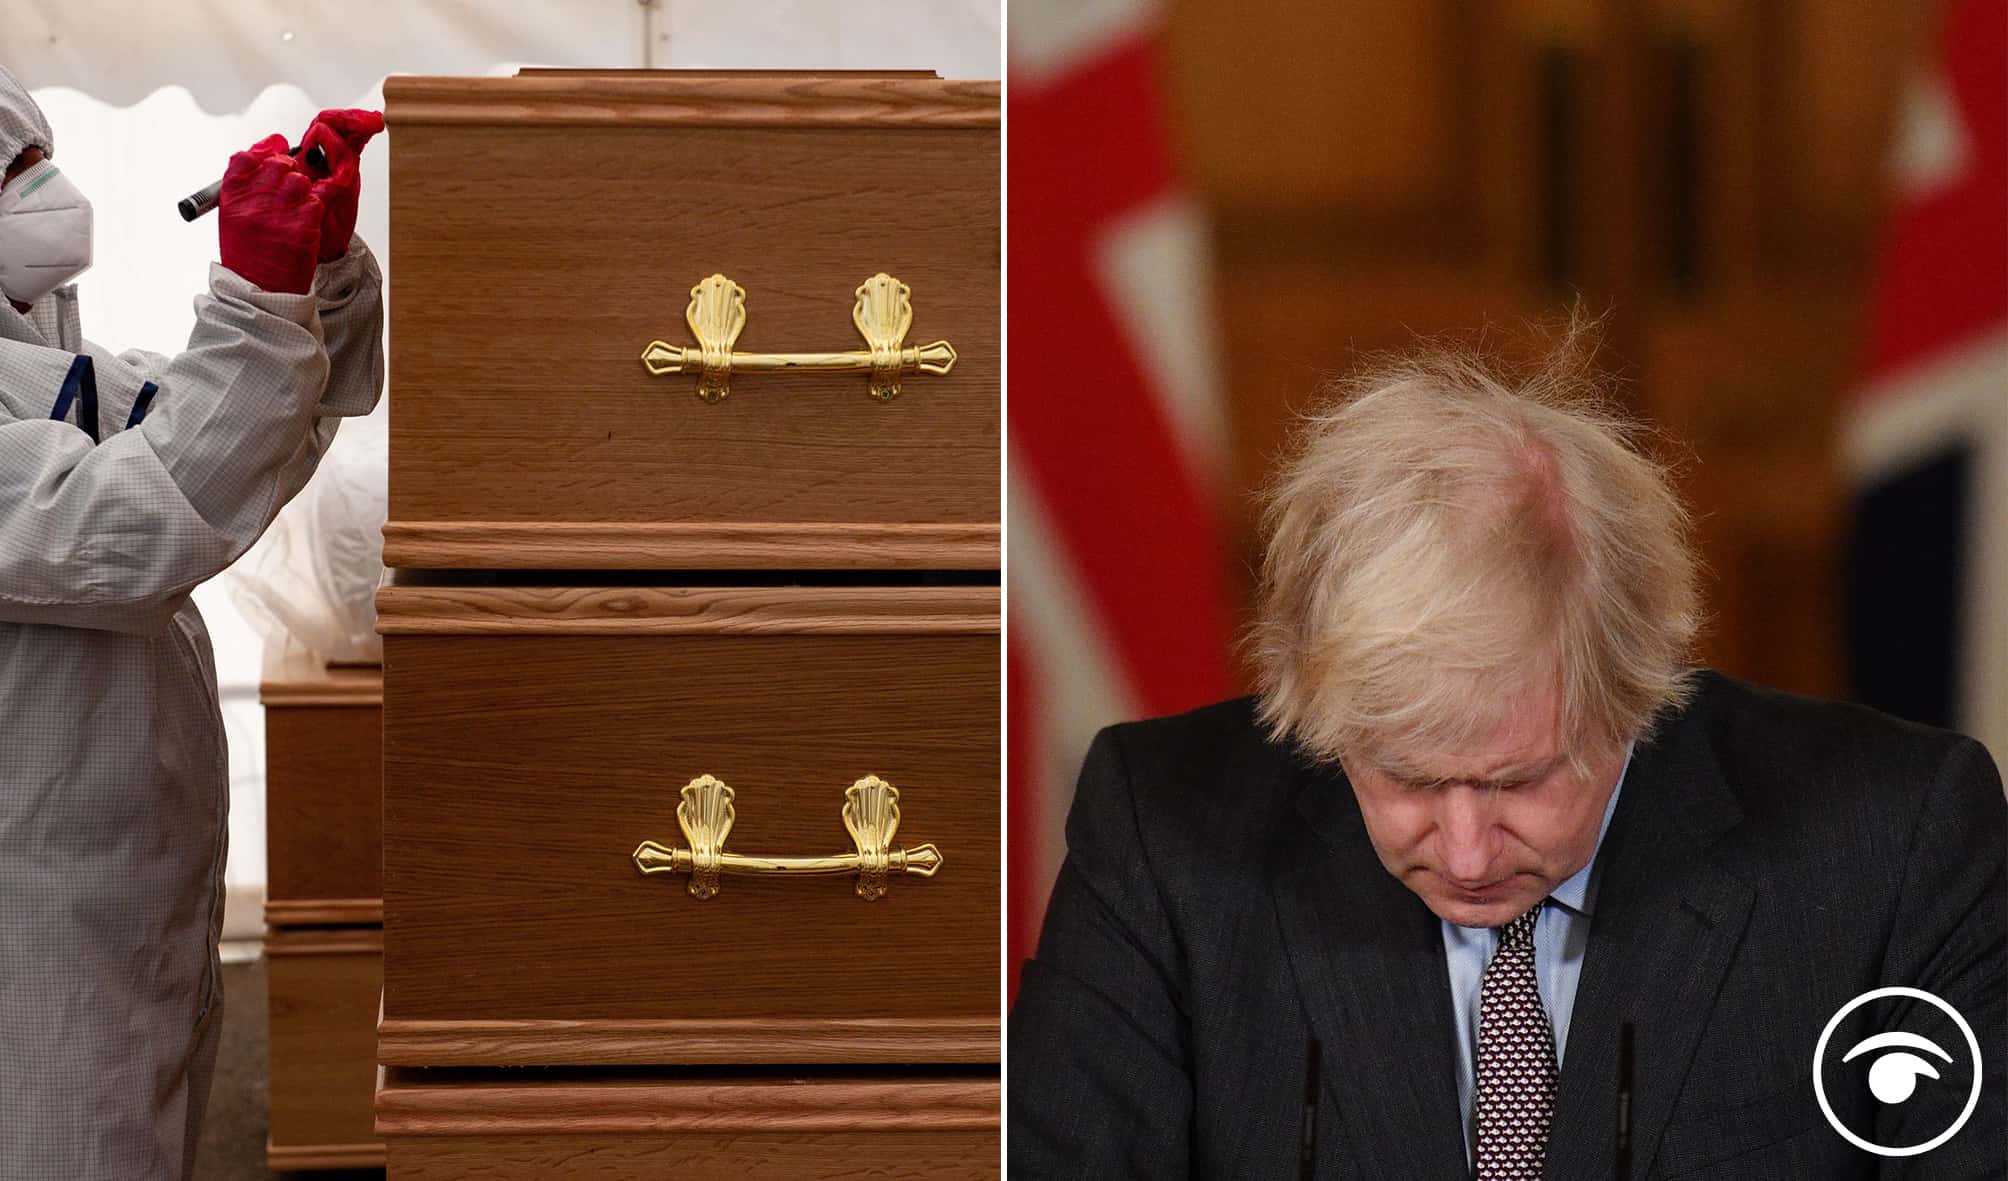 1,725 more Covid deaths as Campbell slams Johnson as ‘worst PM’ and calls for resignation